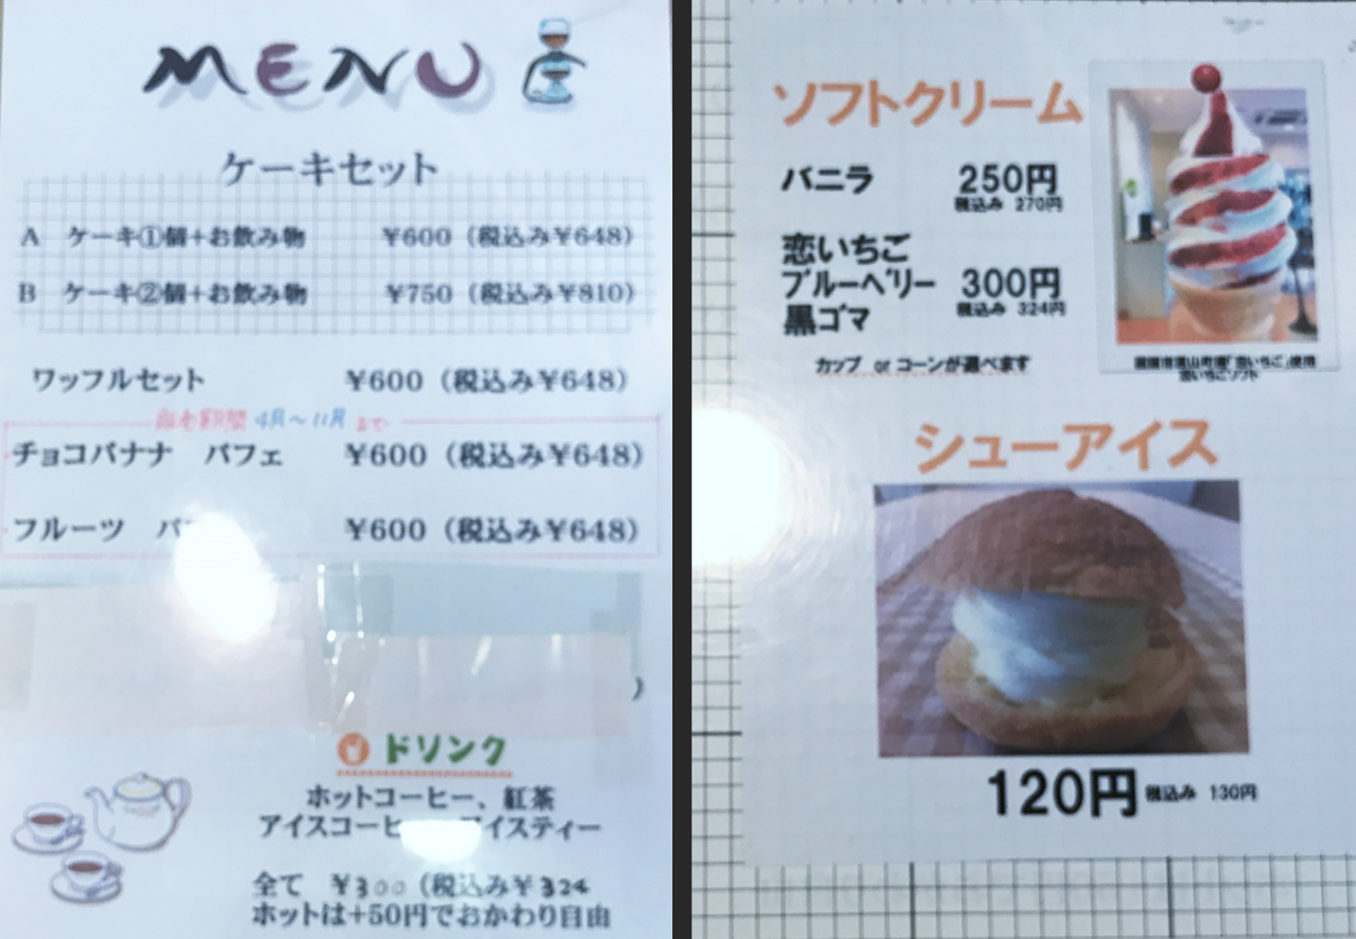 Cafe Bread Toroika トロイカ洋菓子店のカフェ 函館の飲み食い日記 Powered By ライブドアブログ